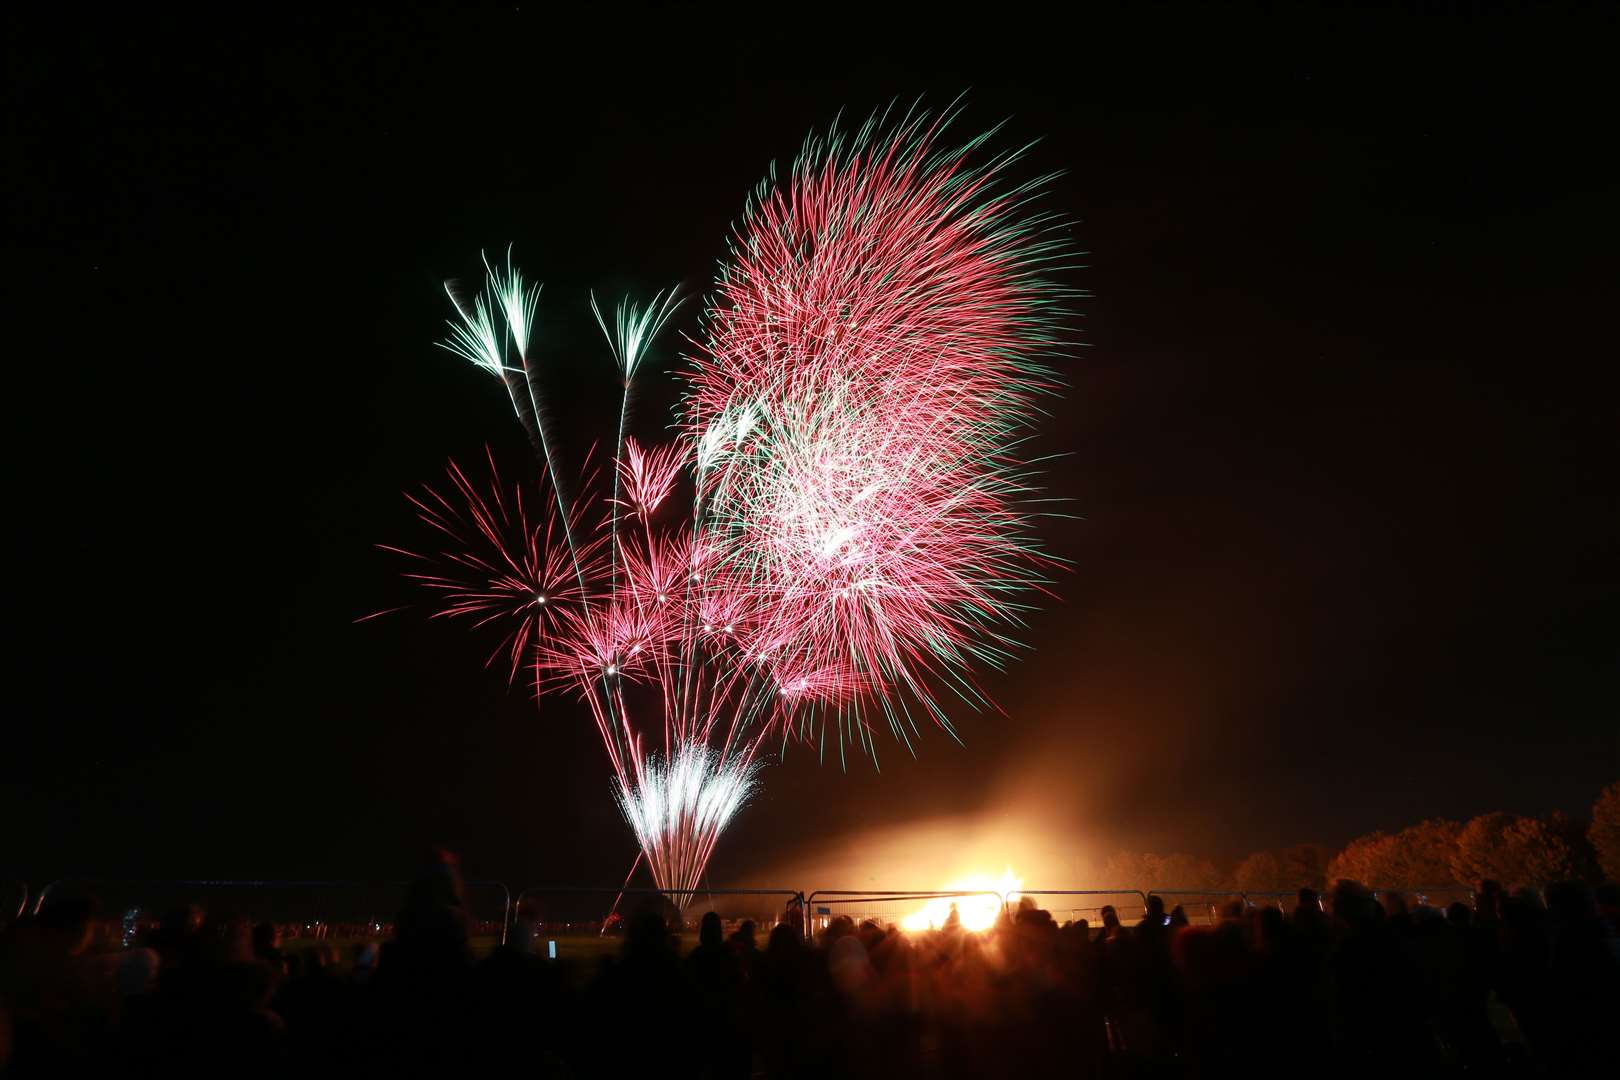 The Great Lines display in Gillingham has been a popular bonfire night event for many years. Picture by: John Westhrop